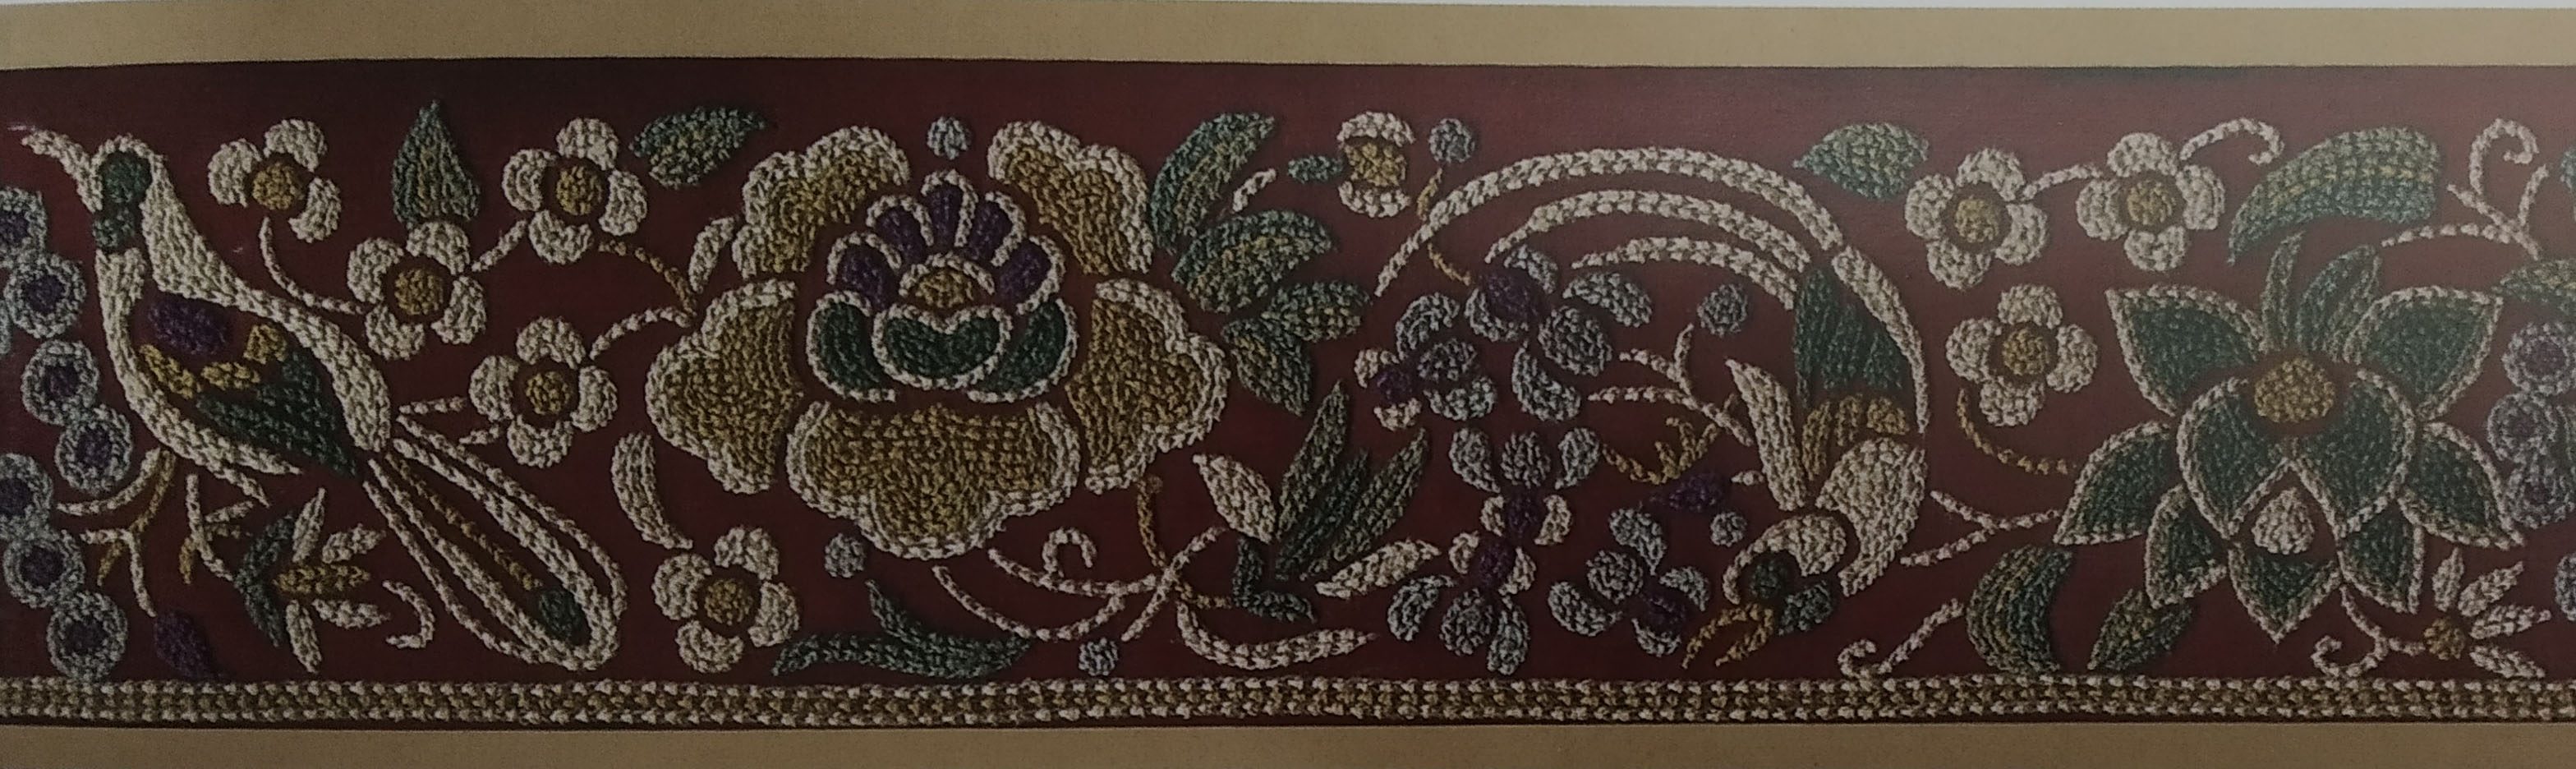 Parsi Embroidery of Gujarat